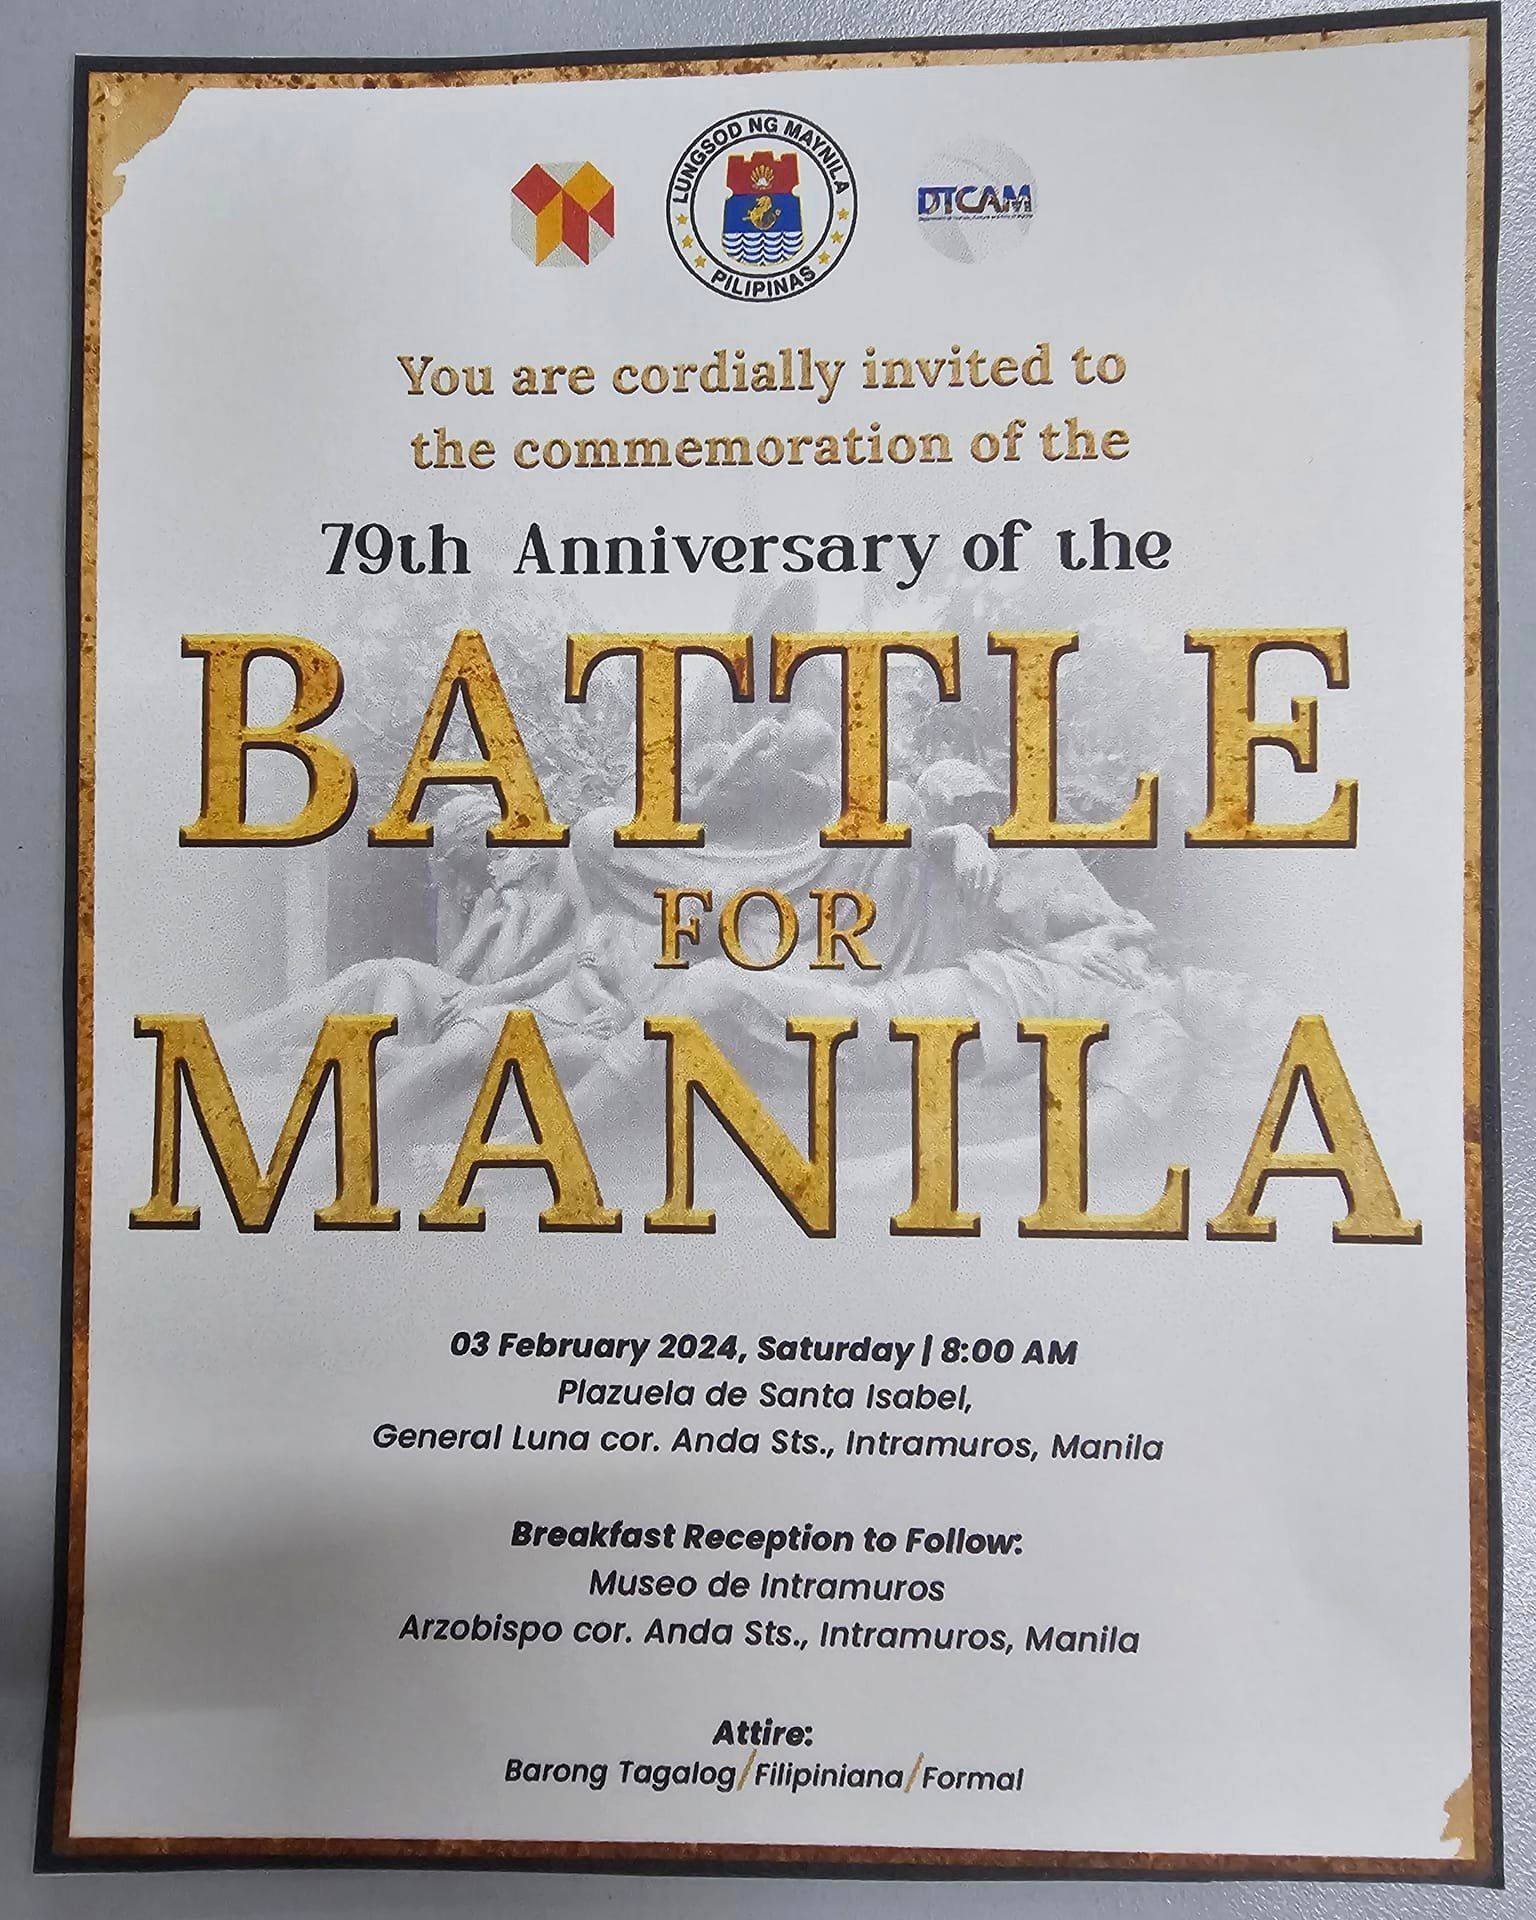 The Pamantasan ng Lungsod ng Maynila joins the City Government of Manila in commemorating the 79th anniversary of the Battle of Manila